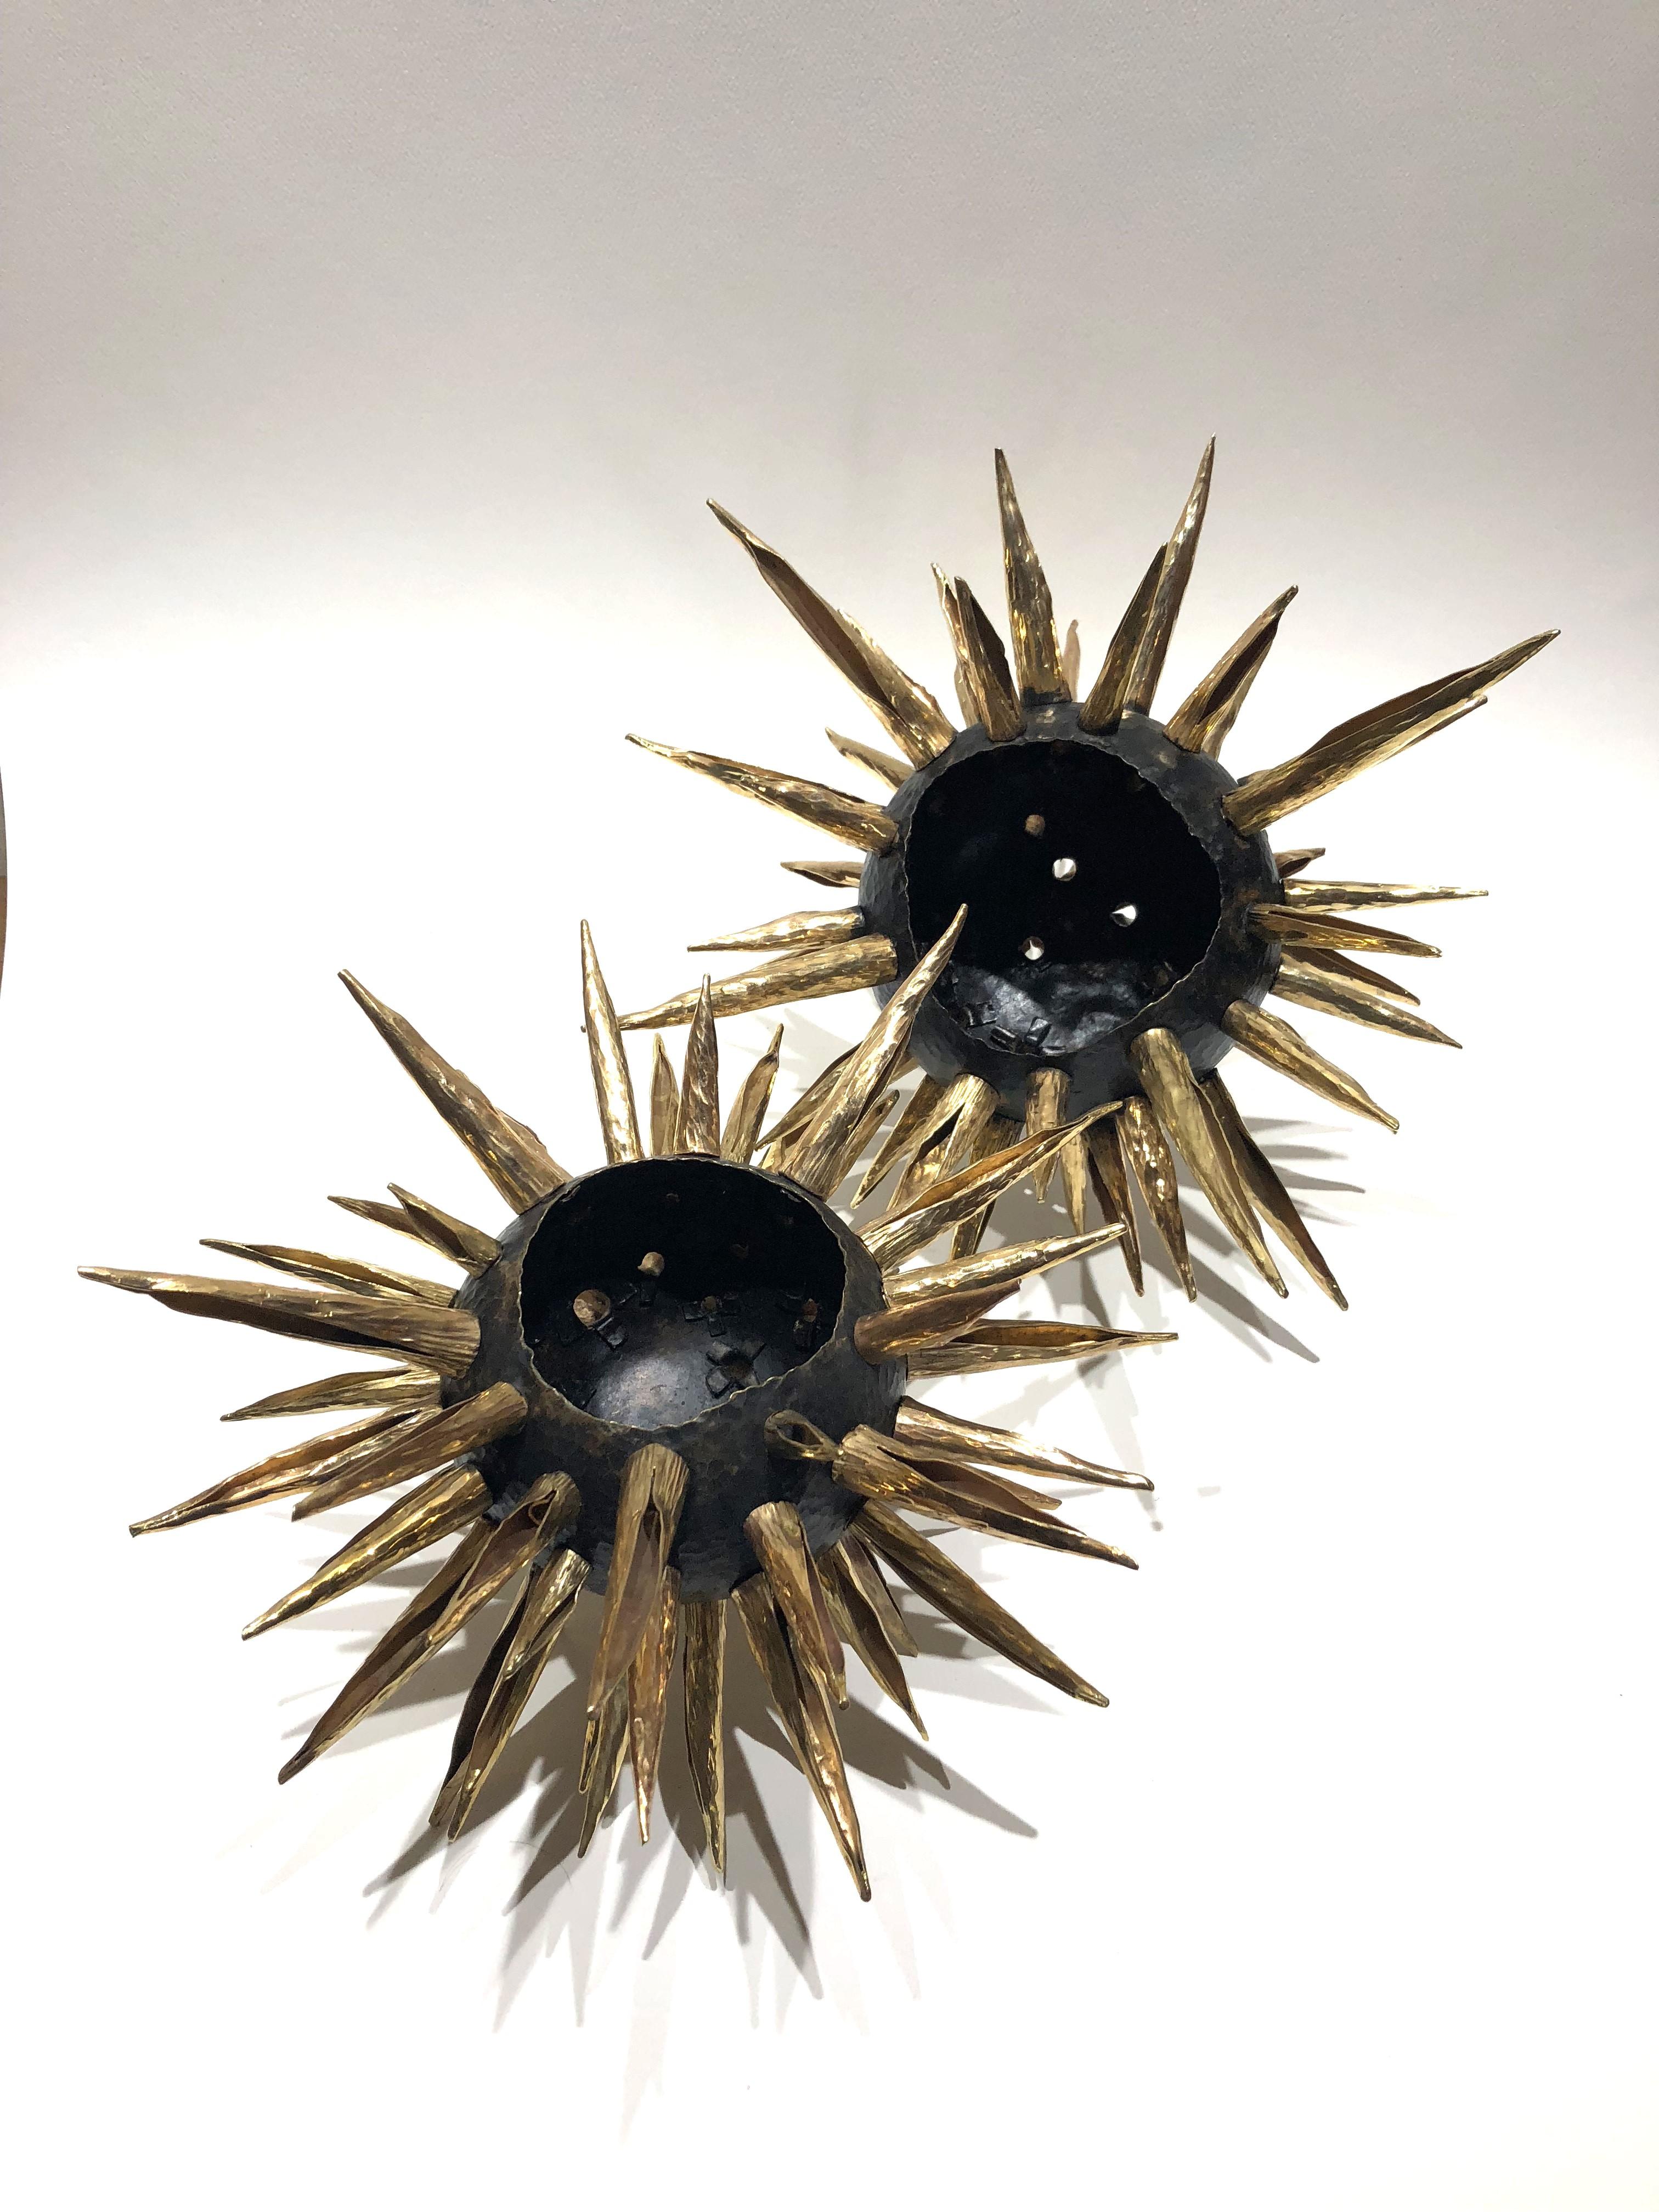 Inspired by the movement and flow of the Sea Urchin, this organic centerpiece is made out of oxidized Tumbaga.

100% hand made by expert craftsmen, each sheet of metal is hand hammered, cut and bent using metal and wood as a last to give each twist